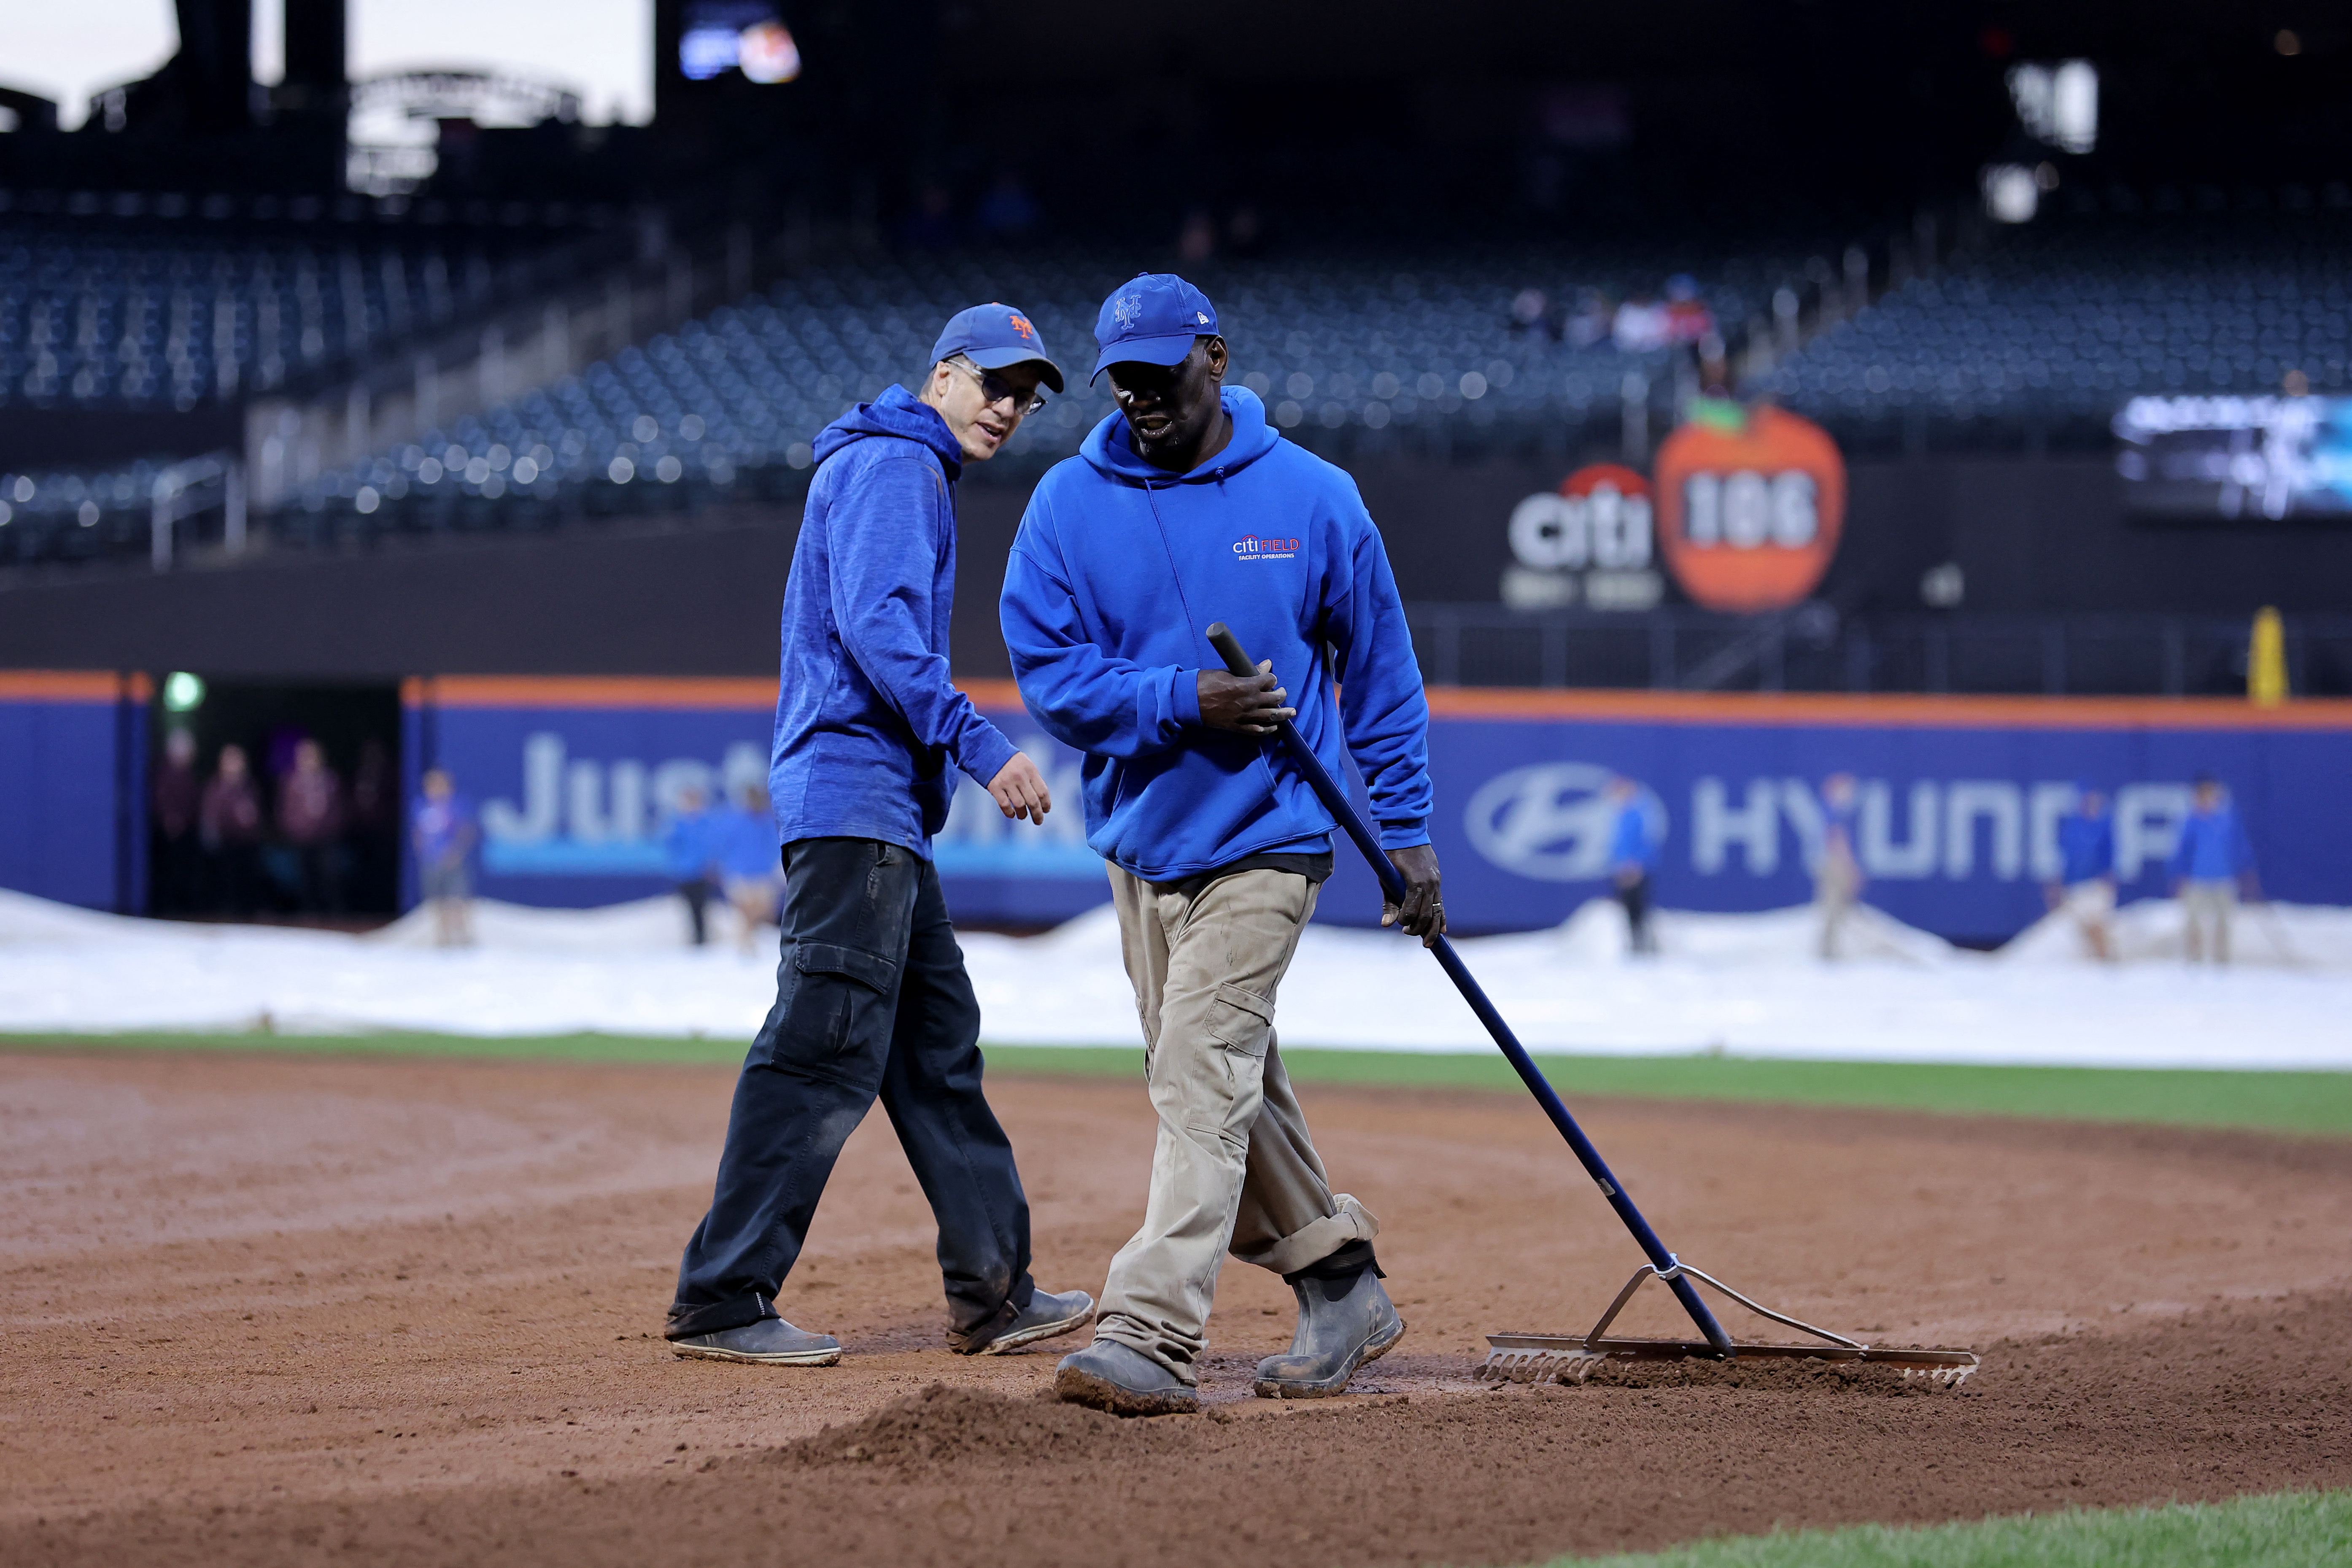 Marlins-Mets game postponed due to unplayable field conditions